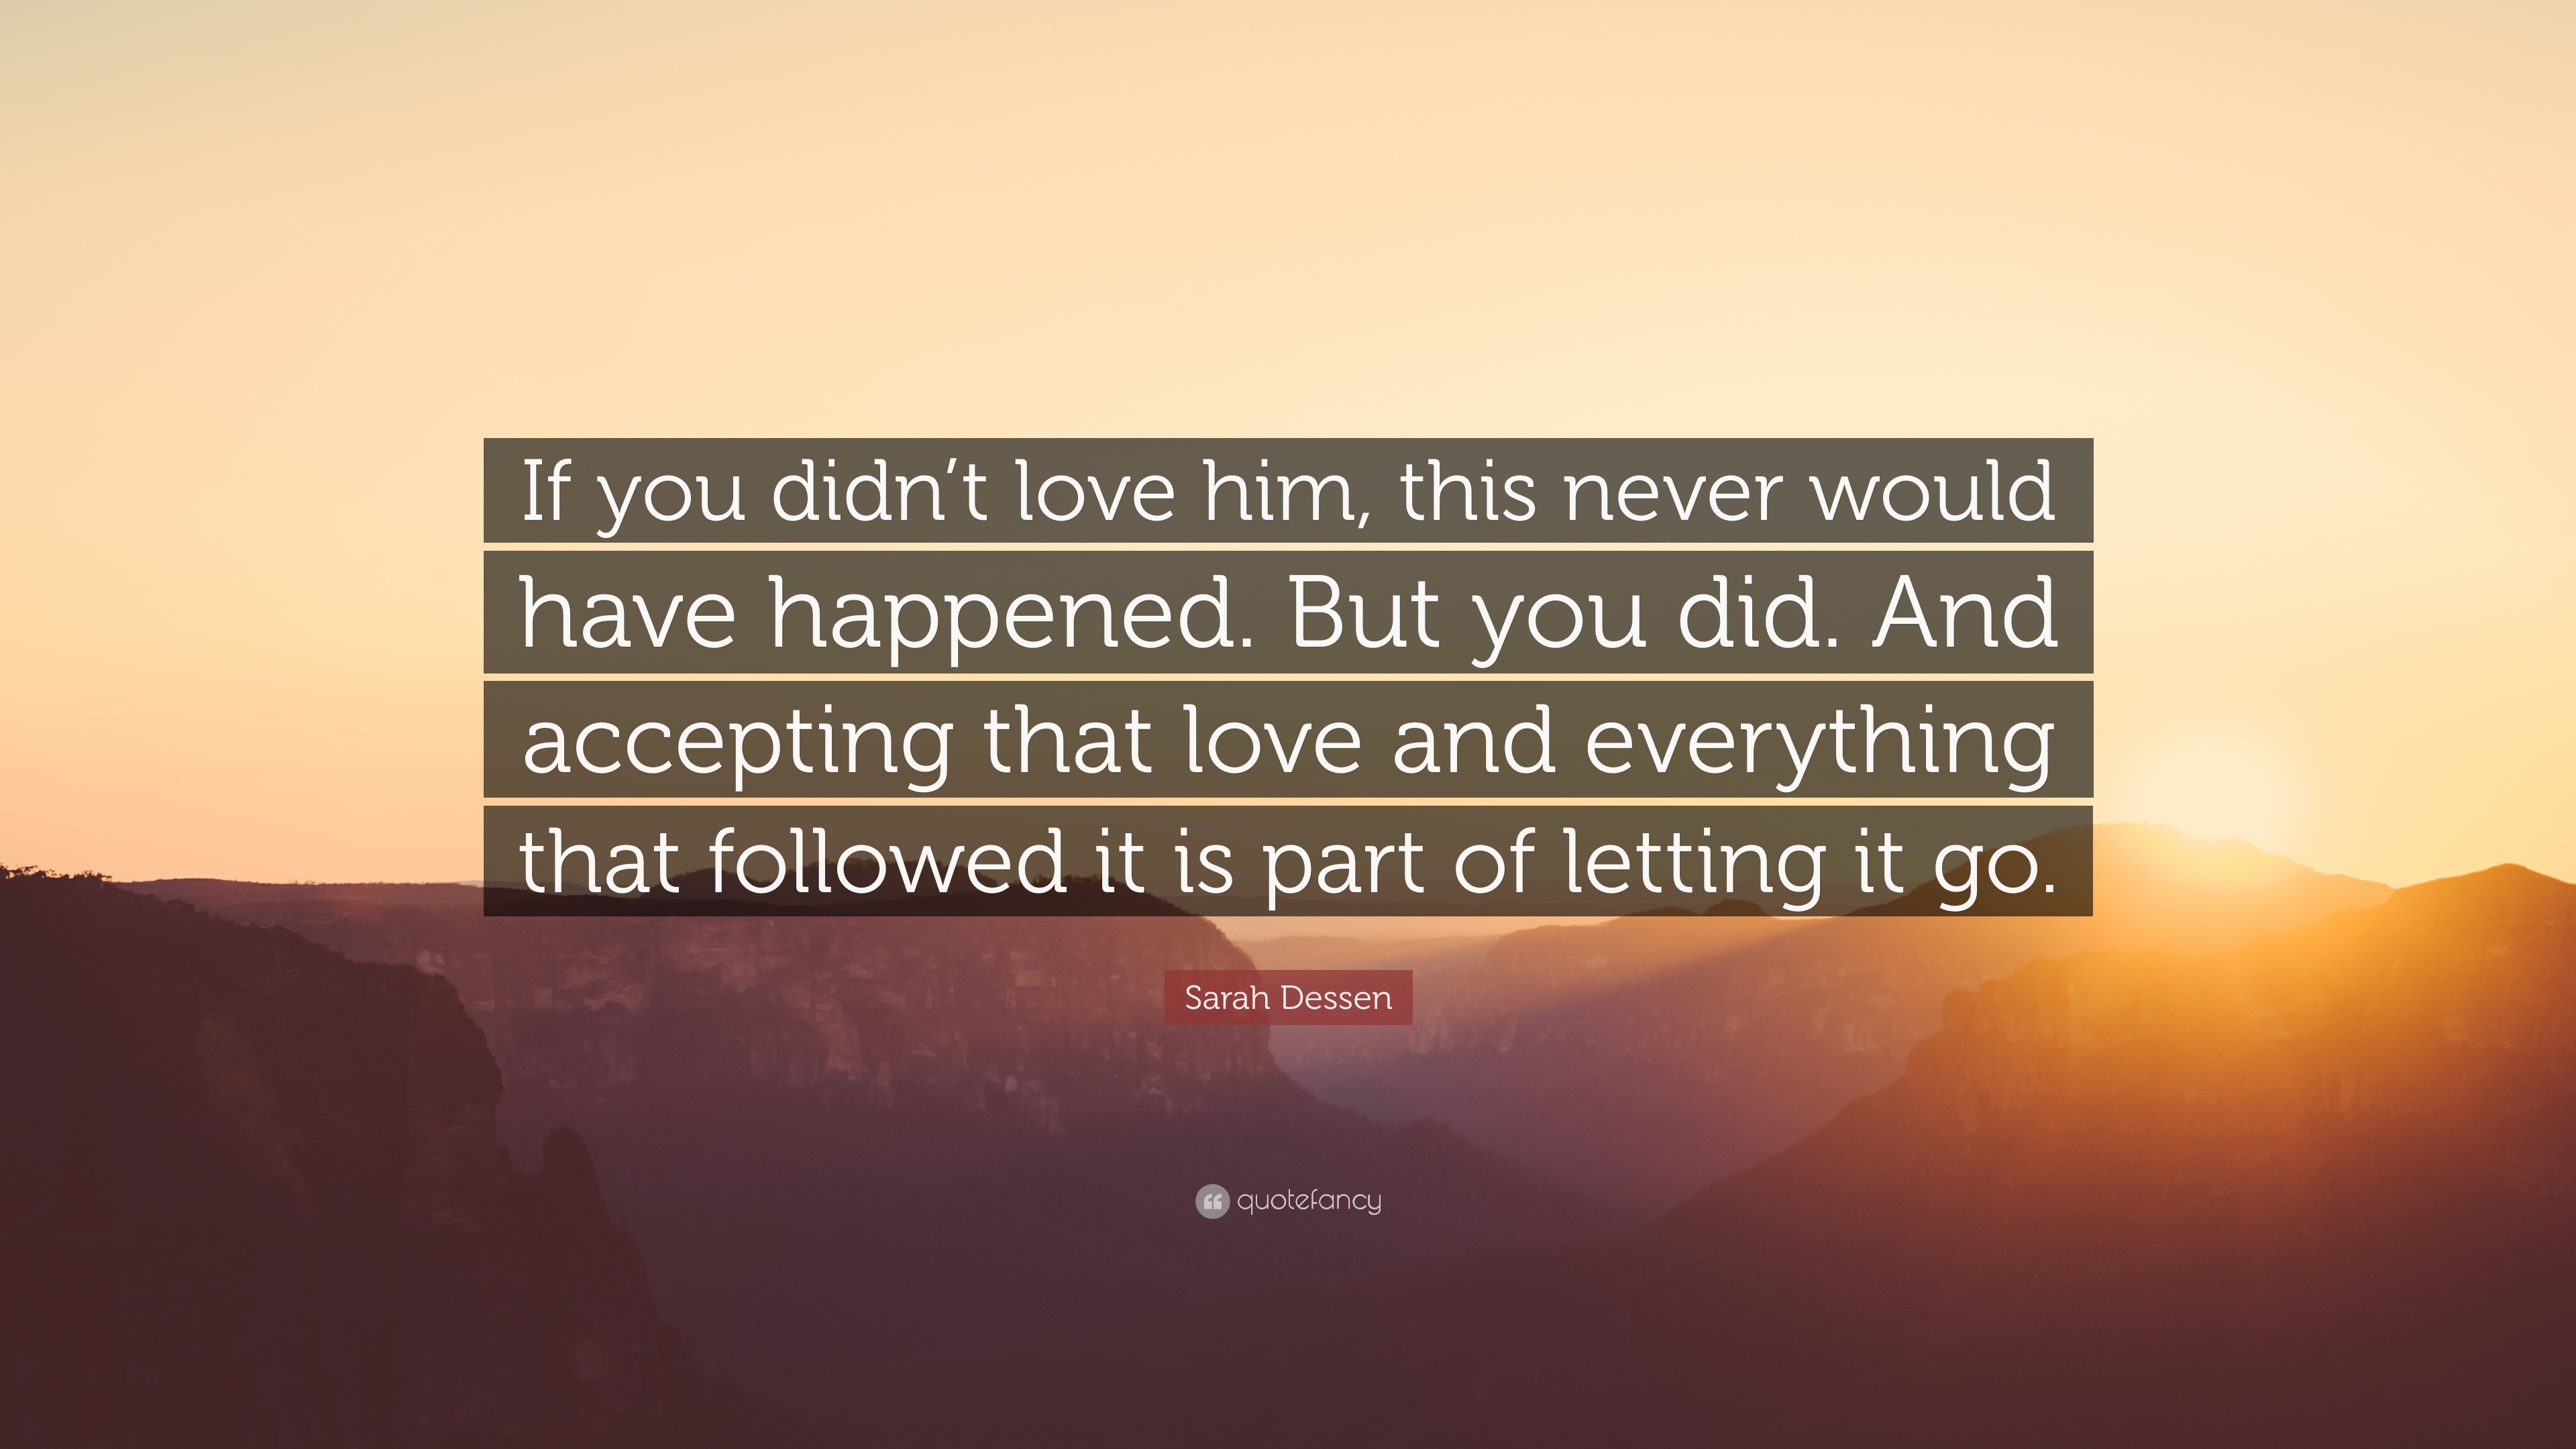 Sarah Dessen Quote “If you didn t love him this never would